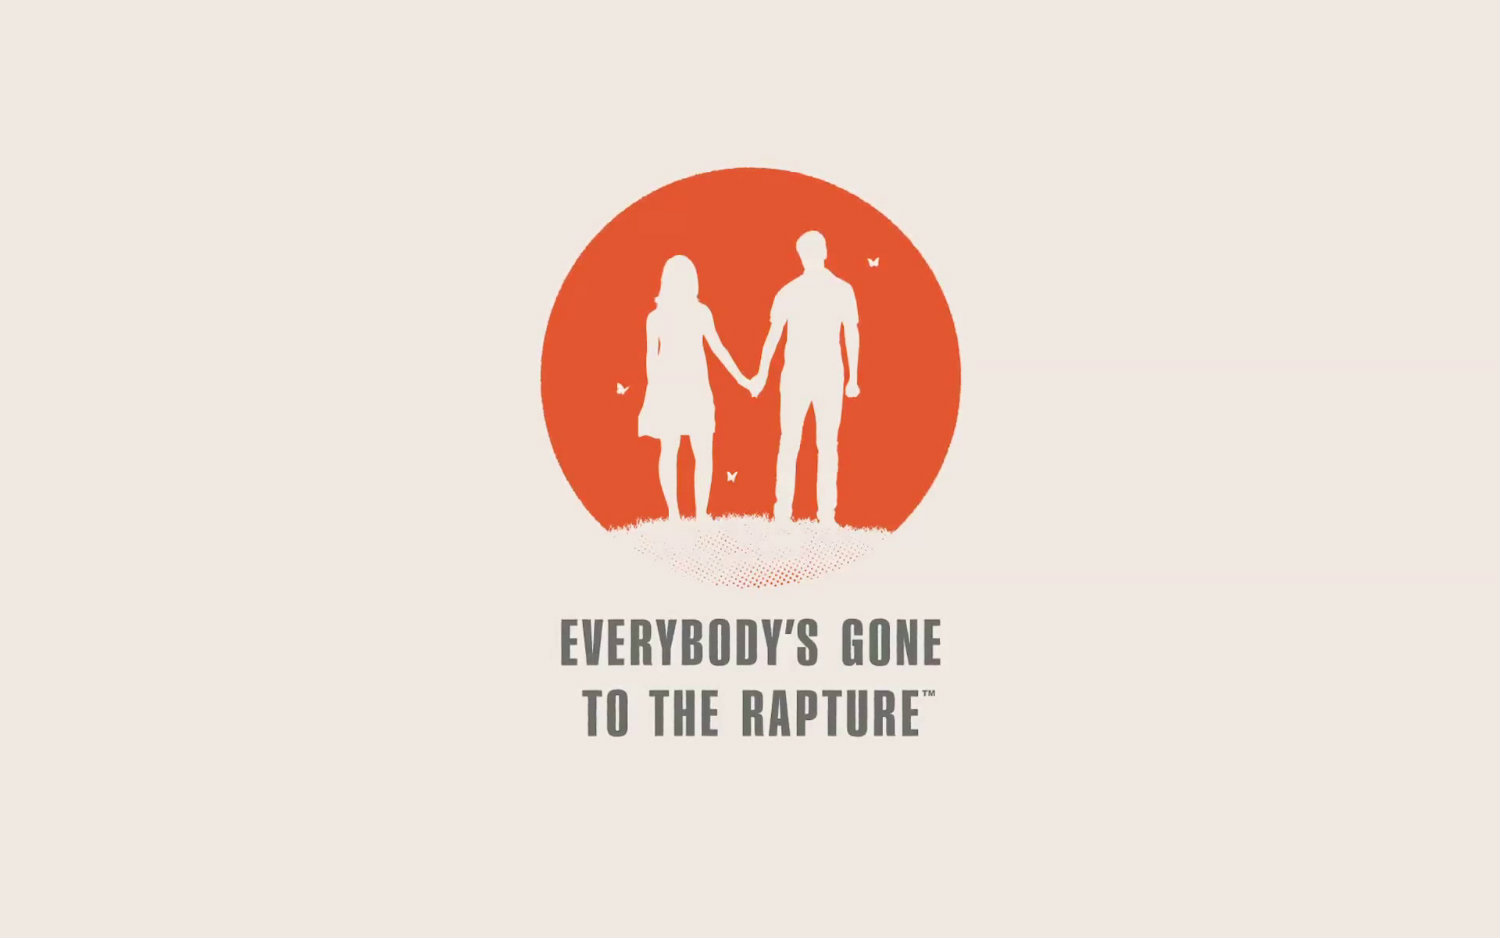 Everybody's gone to the Rapture